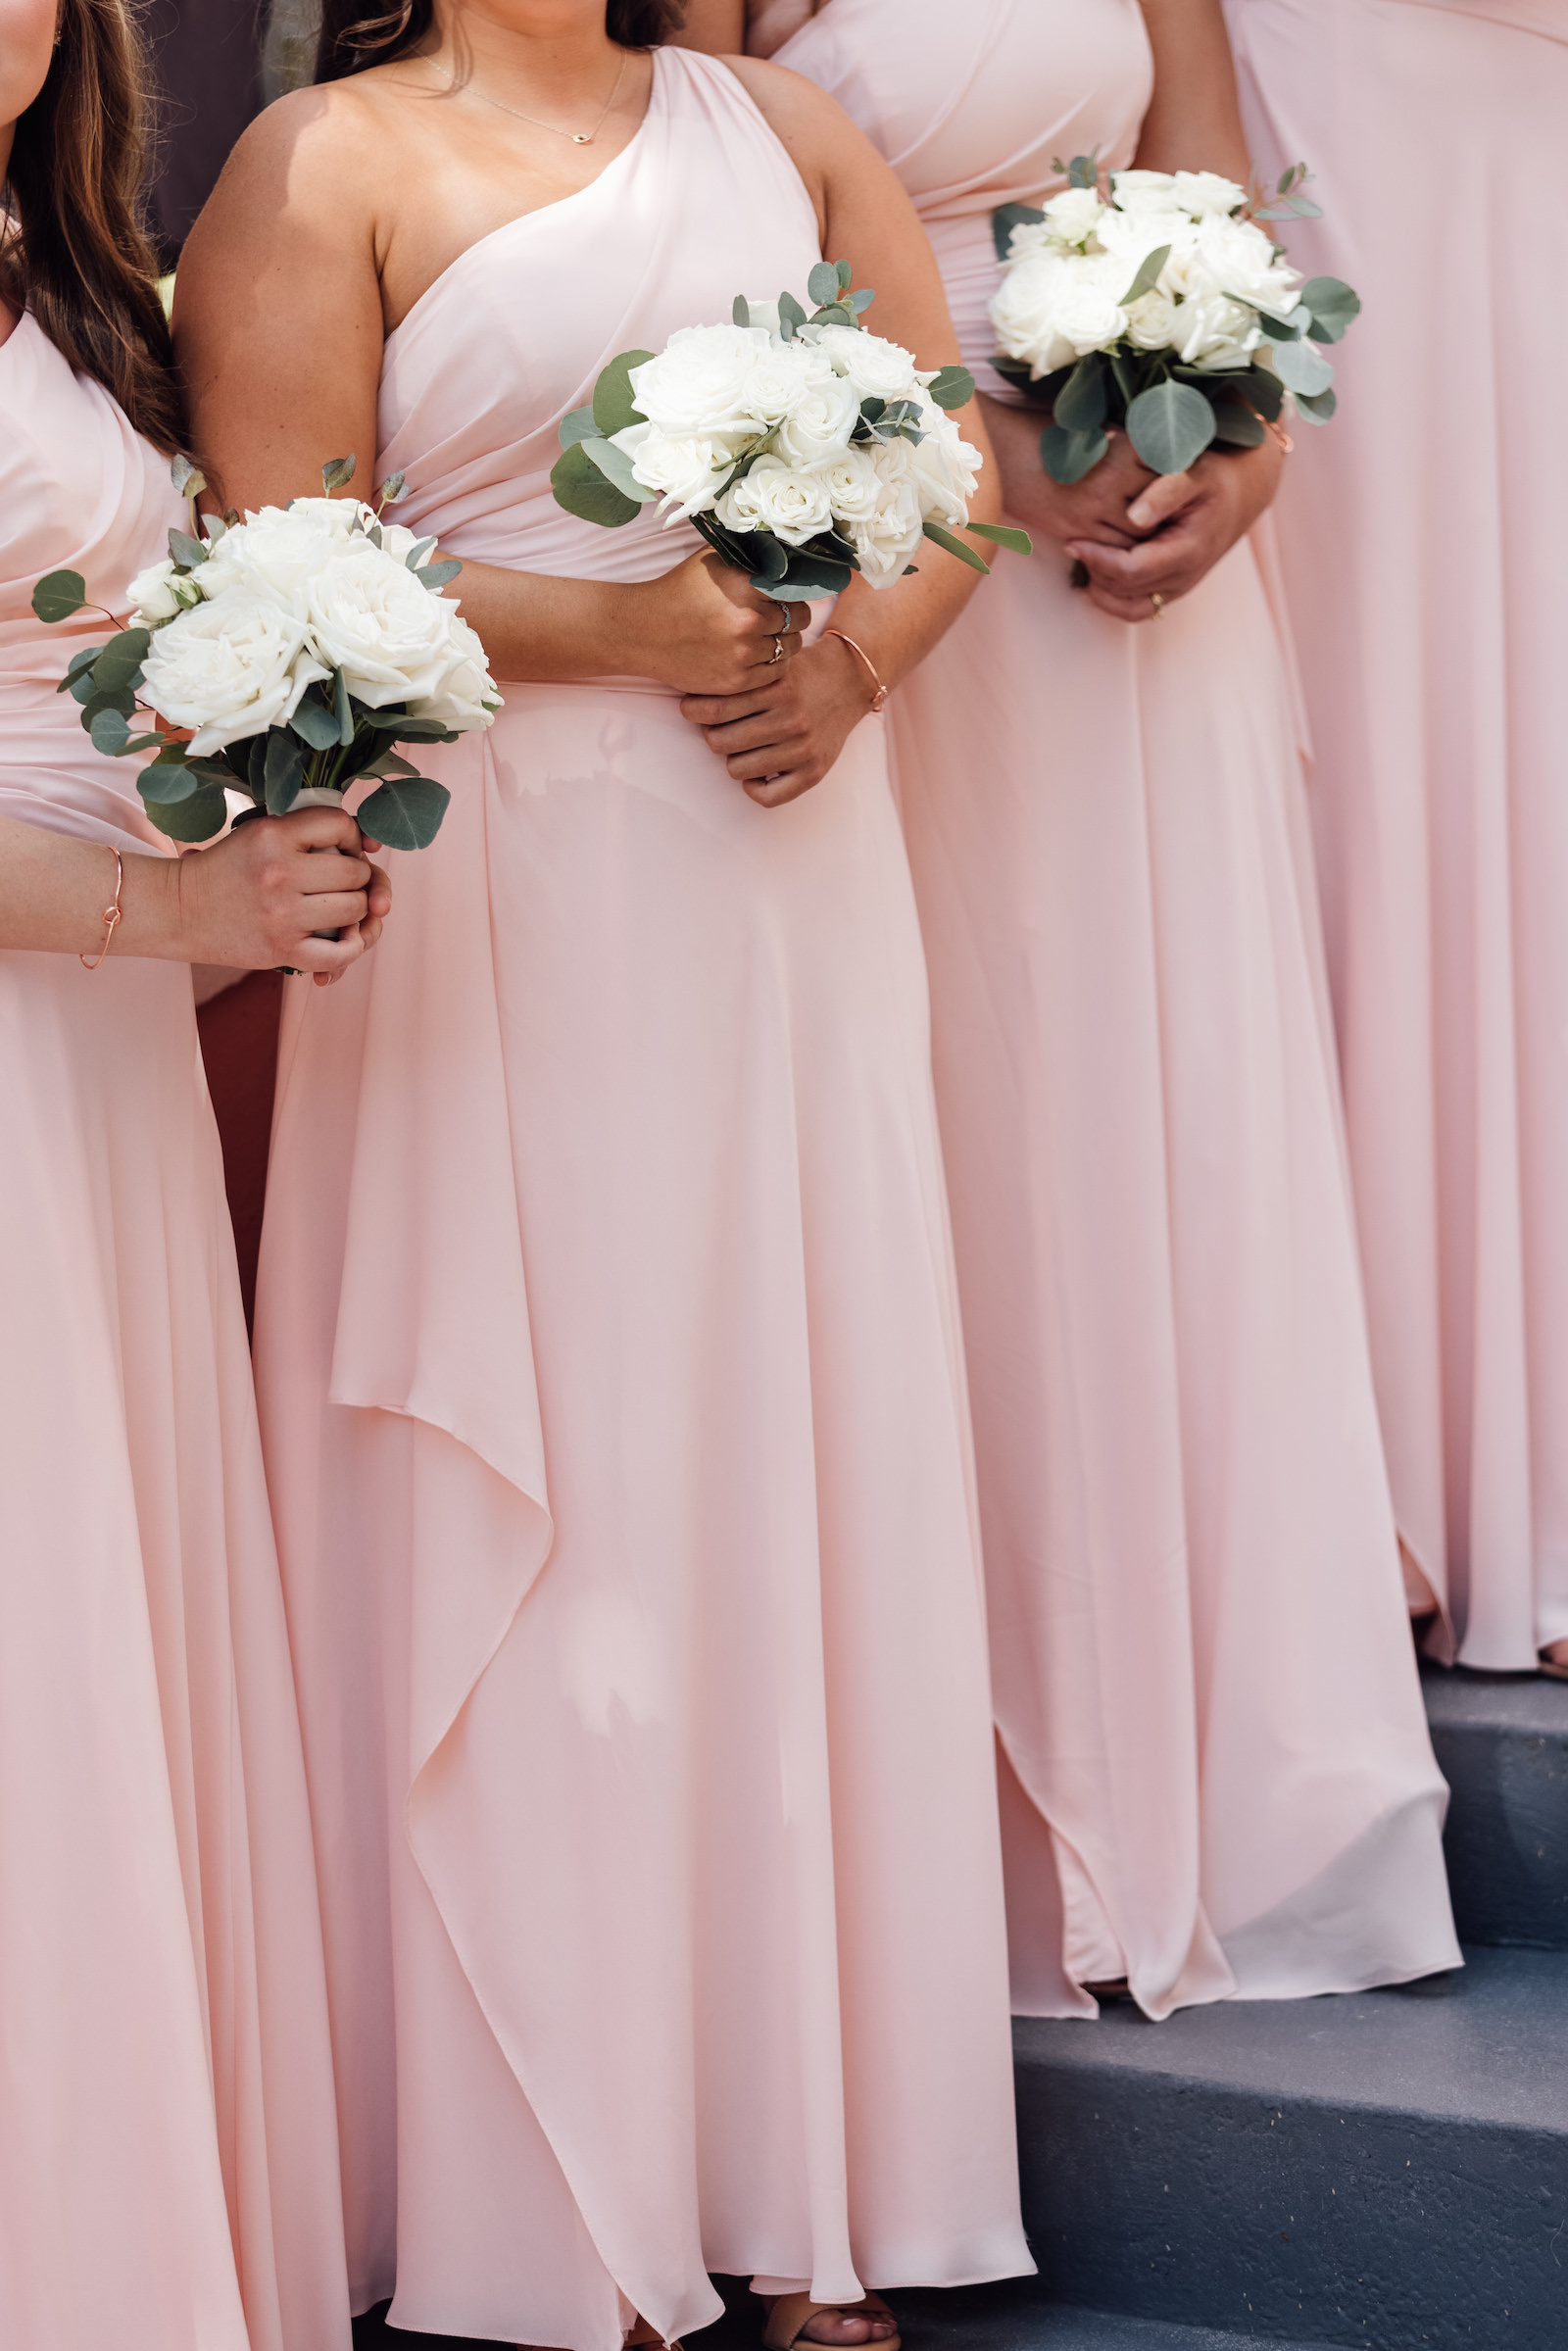 Blush Pink Bridesmaids Dresses with White Rose and Greenery Bouquet | St. Pete Wedding Florist Bruce Wayne Florals